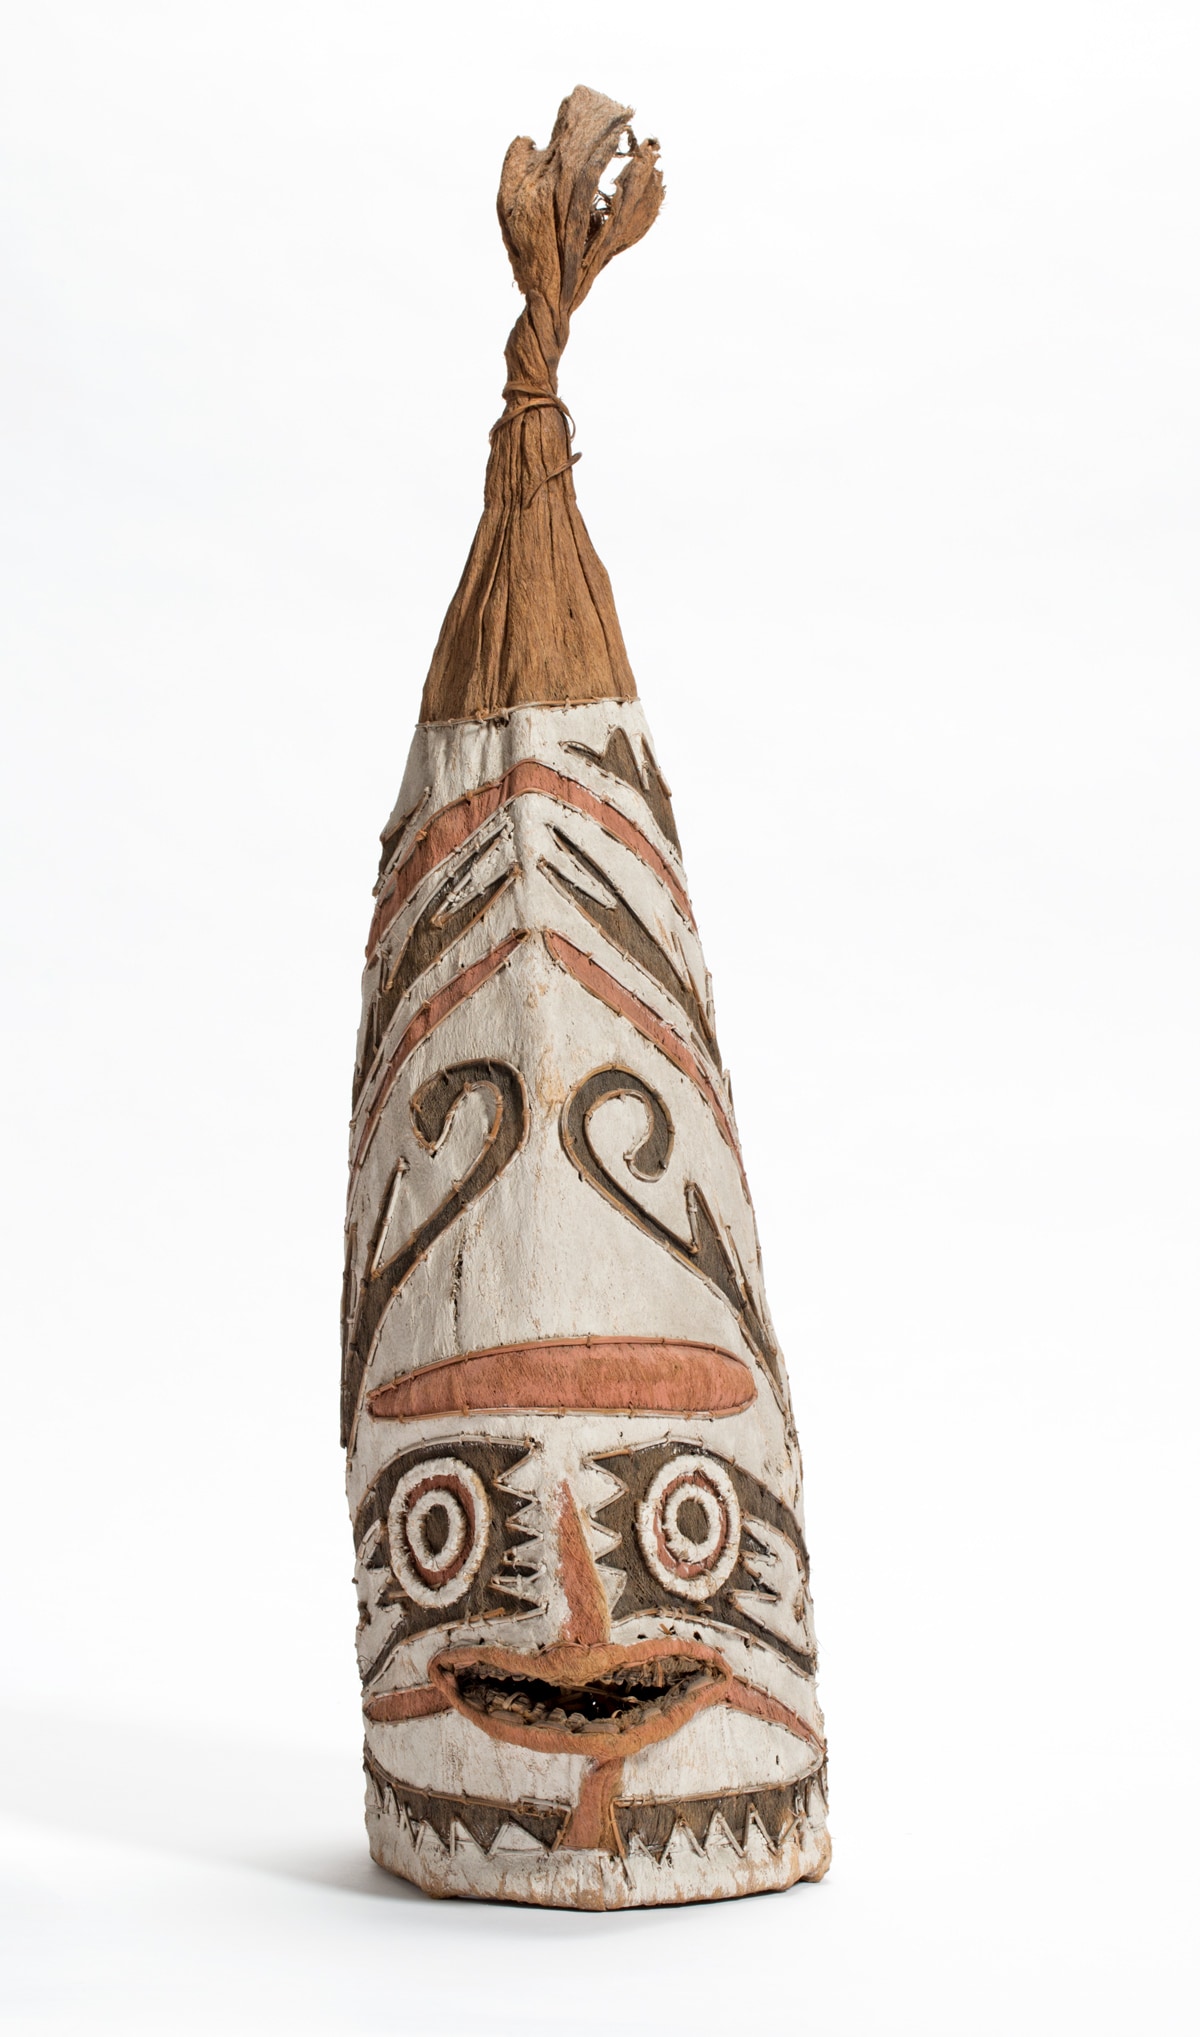 Bark cloth mask with red, black and white details from Papua New Guinea